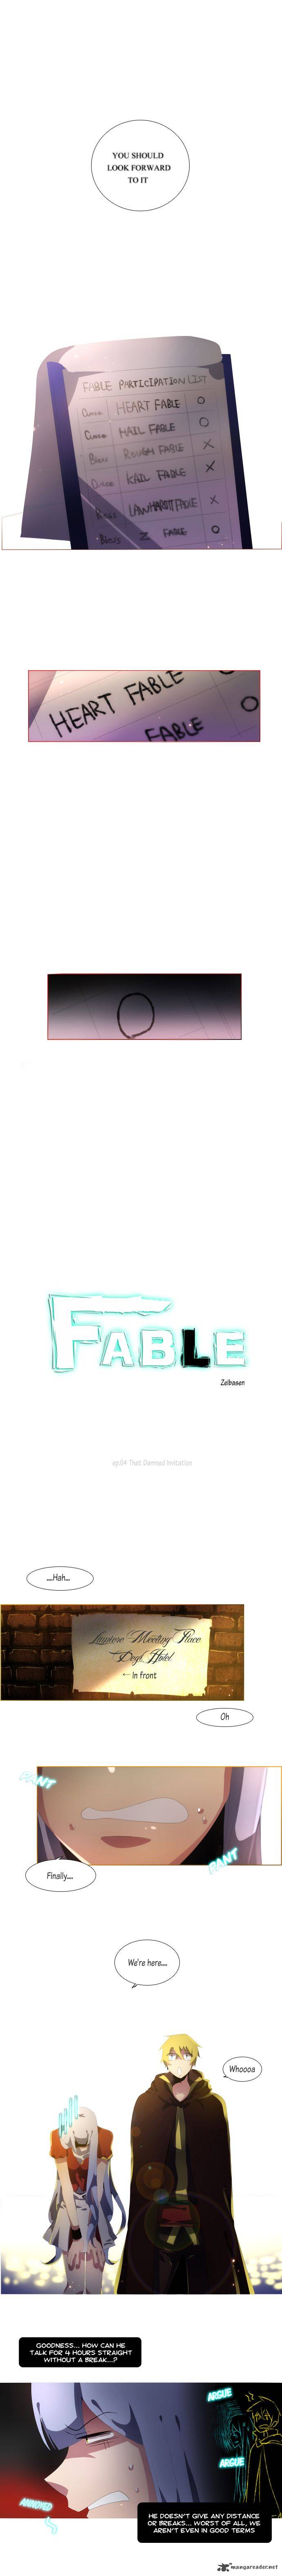 fable_4_4